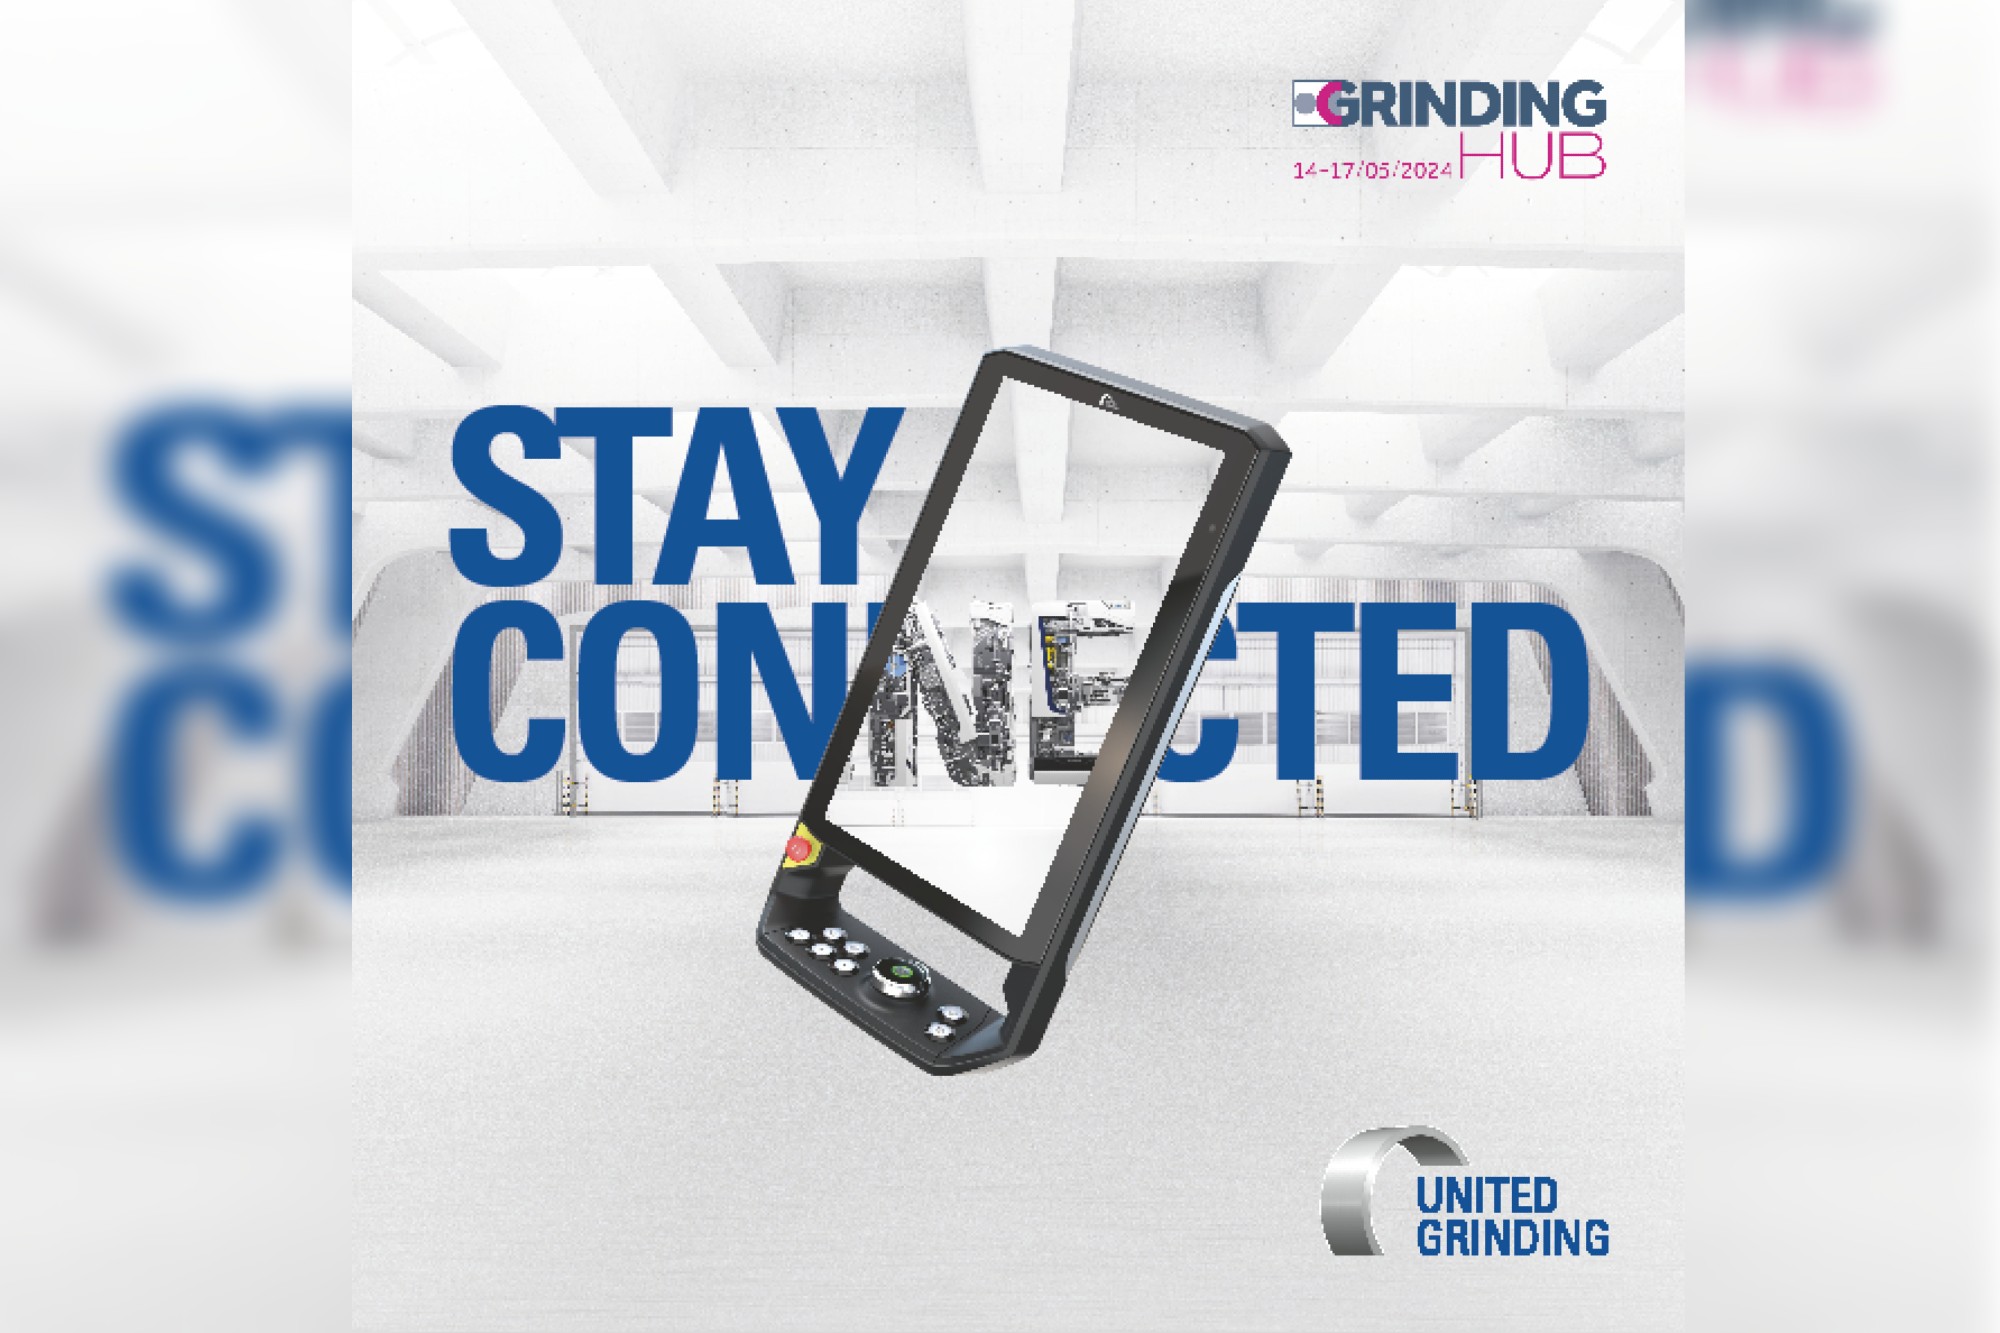 UNITED GRINDING presents innovation at the GrindingHub